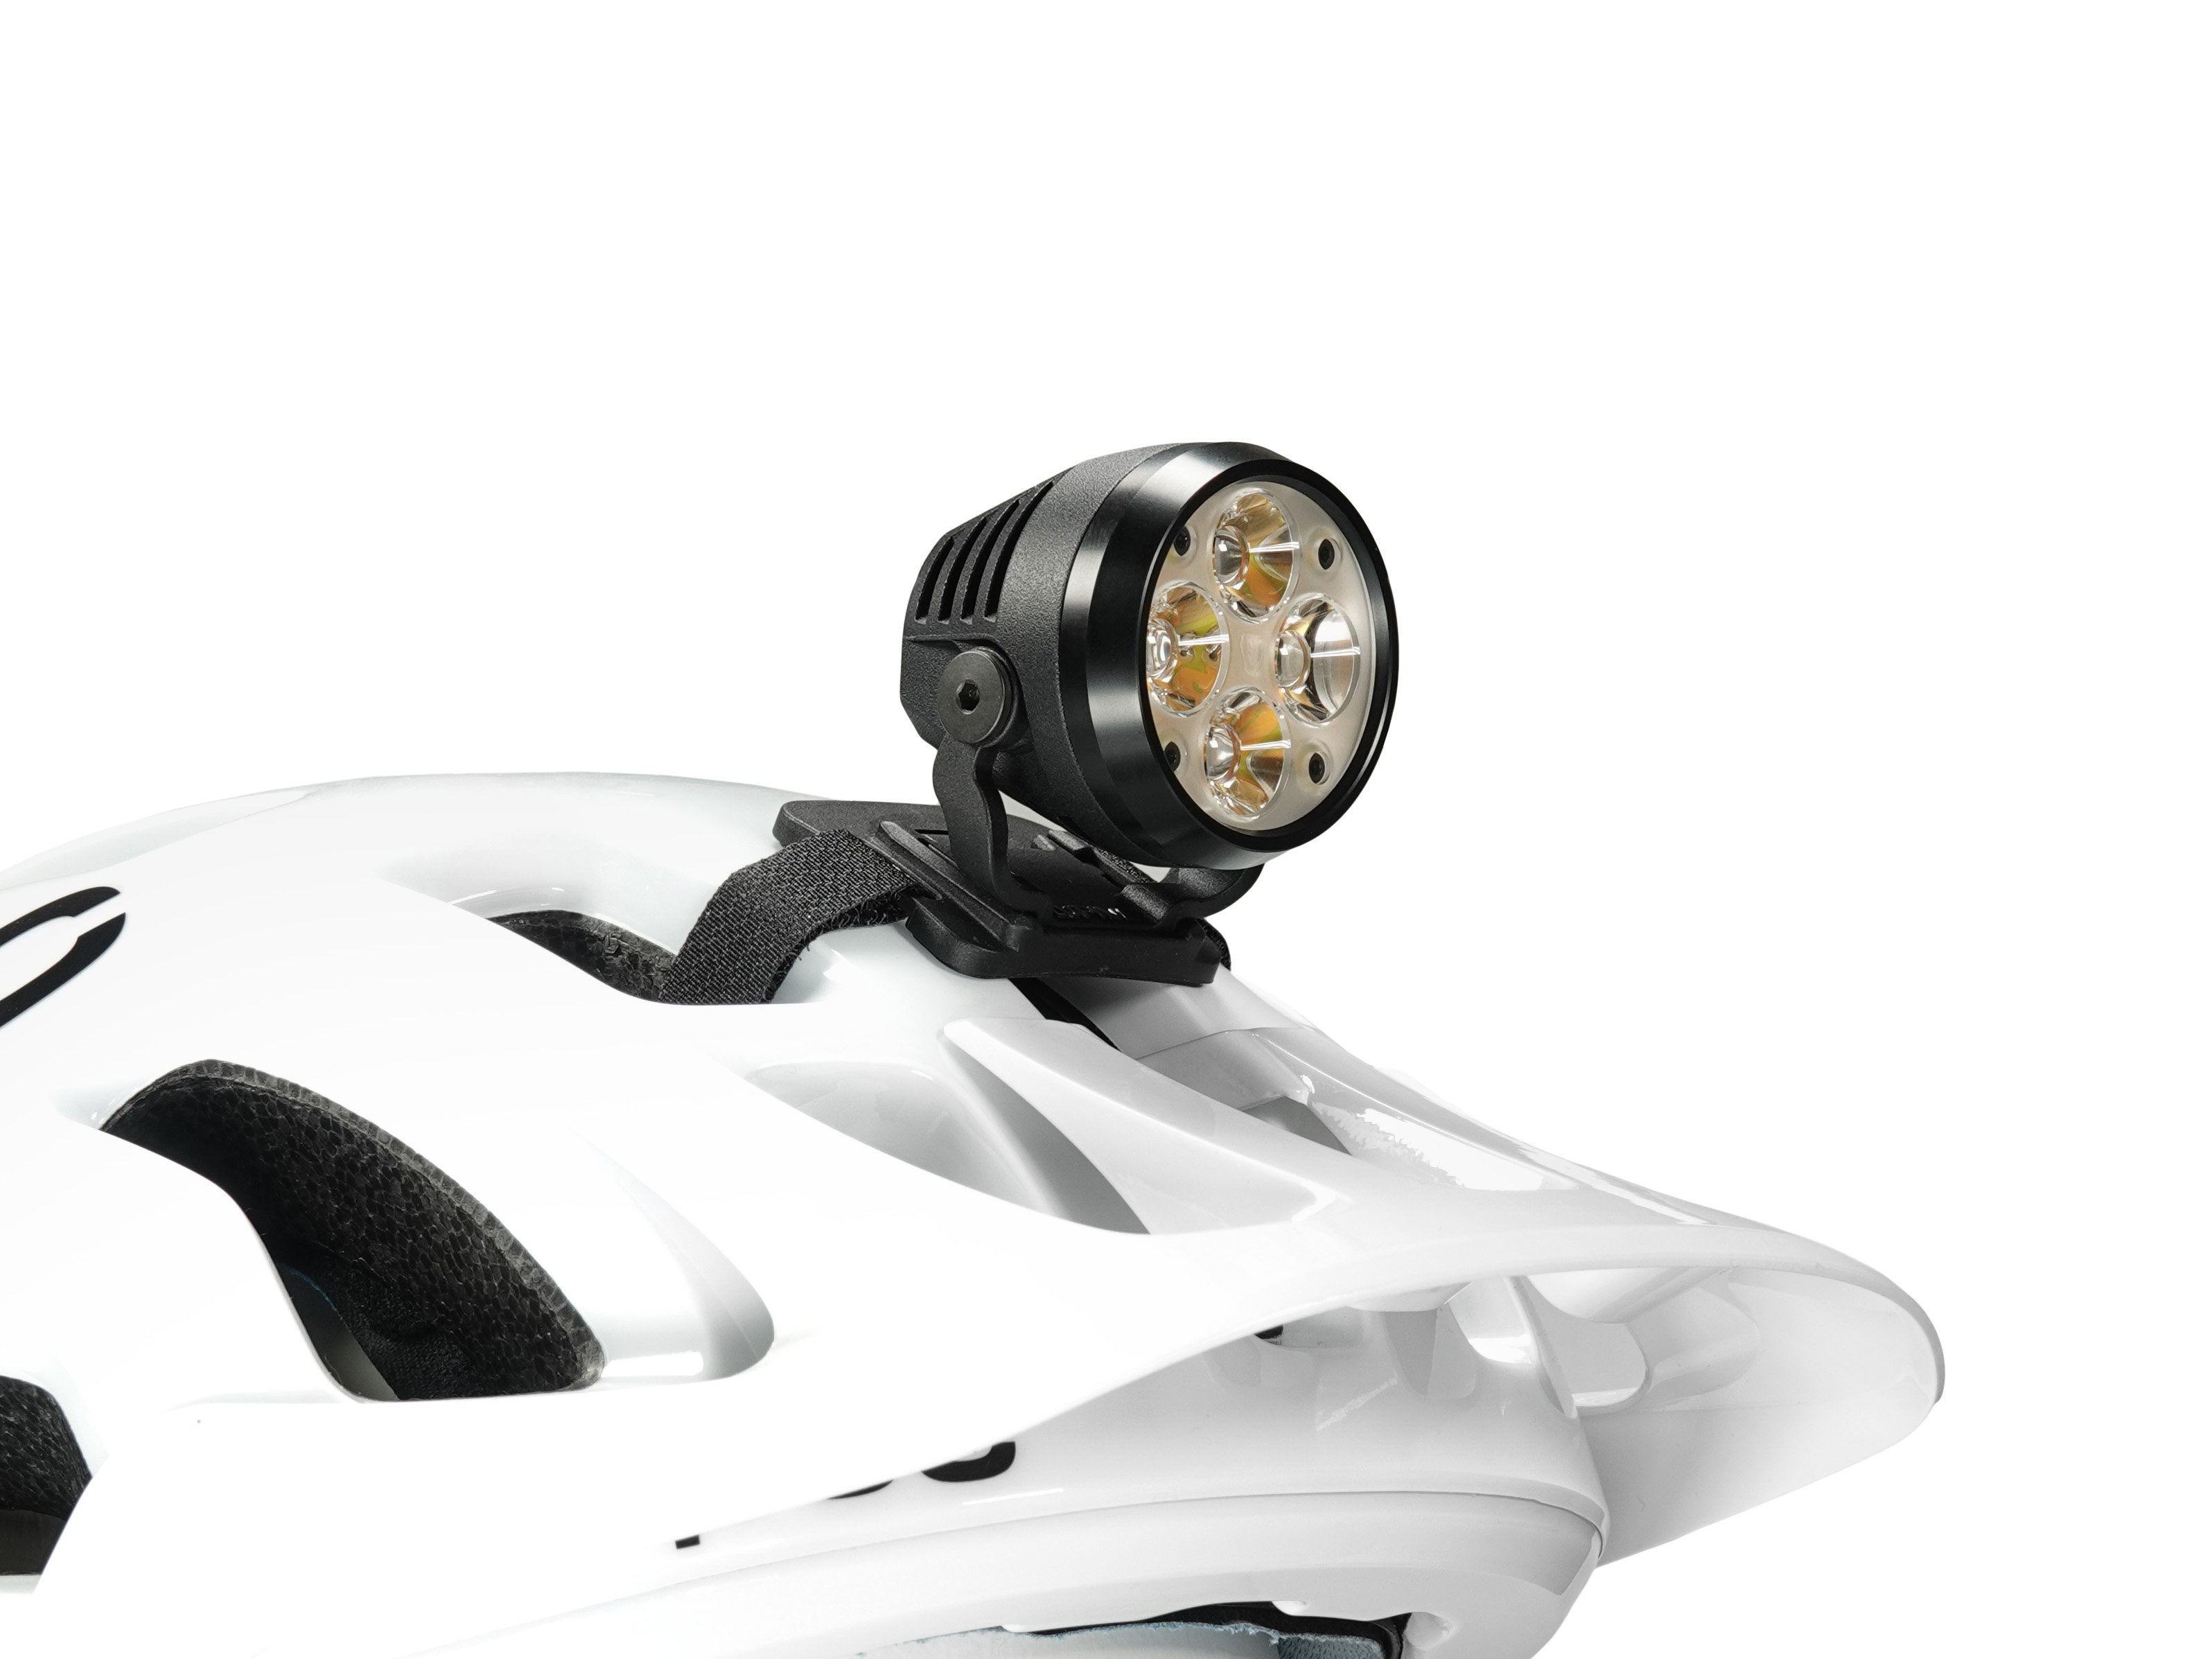 LUPINE Wilma RX14 3200Lumens - Lampe frontale ultra puissante